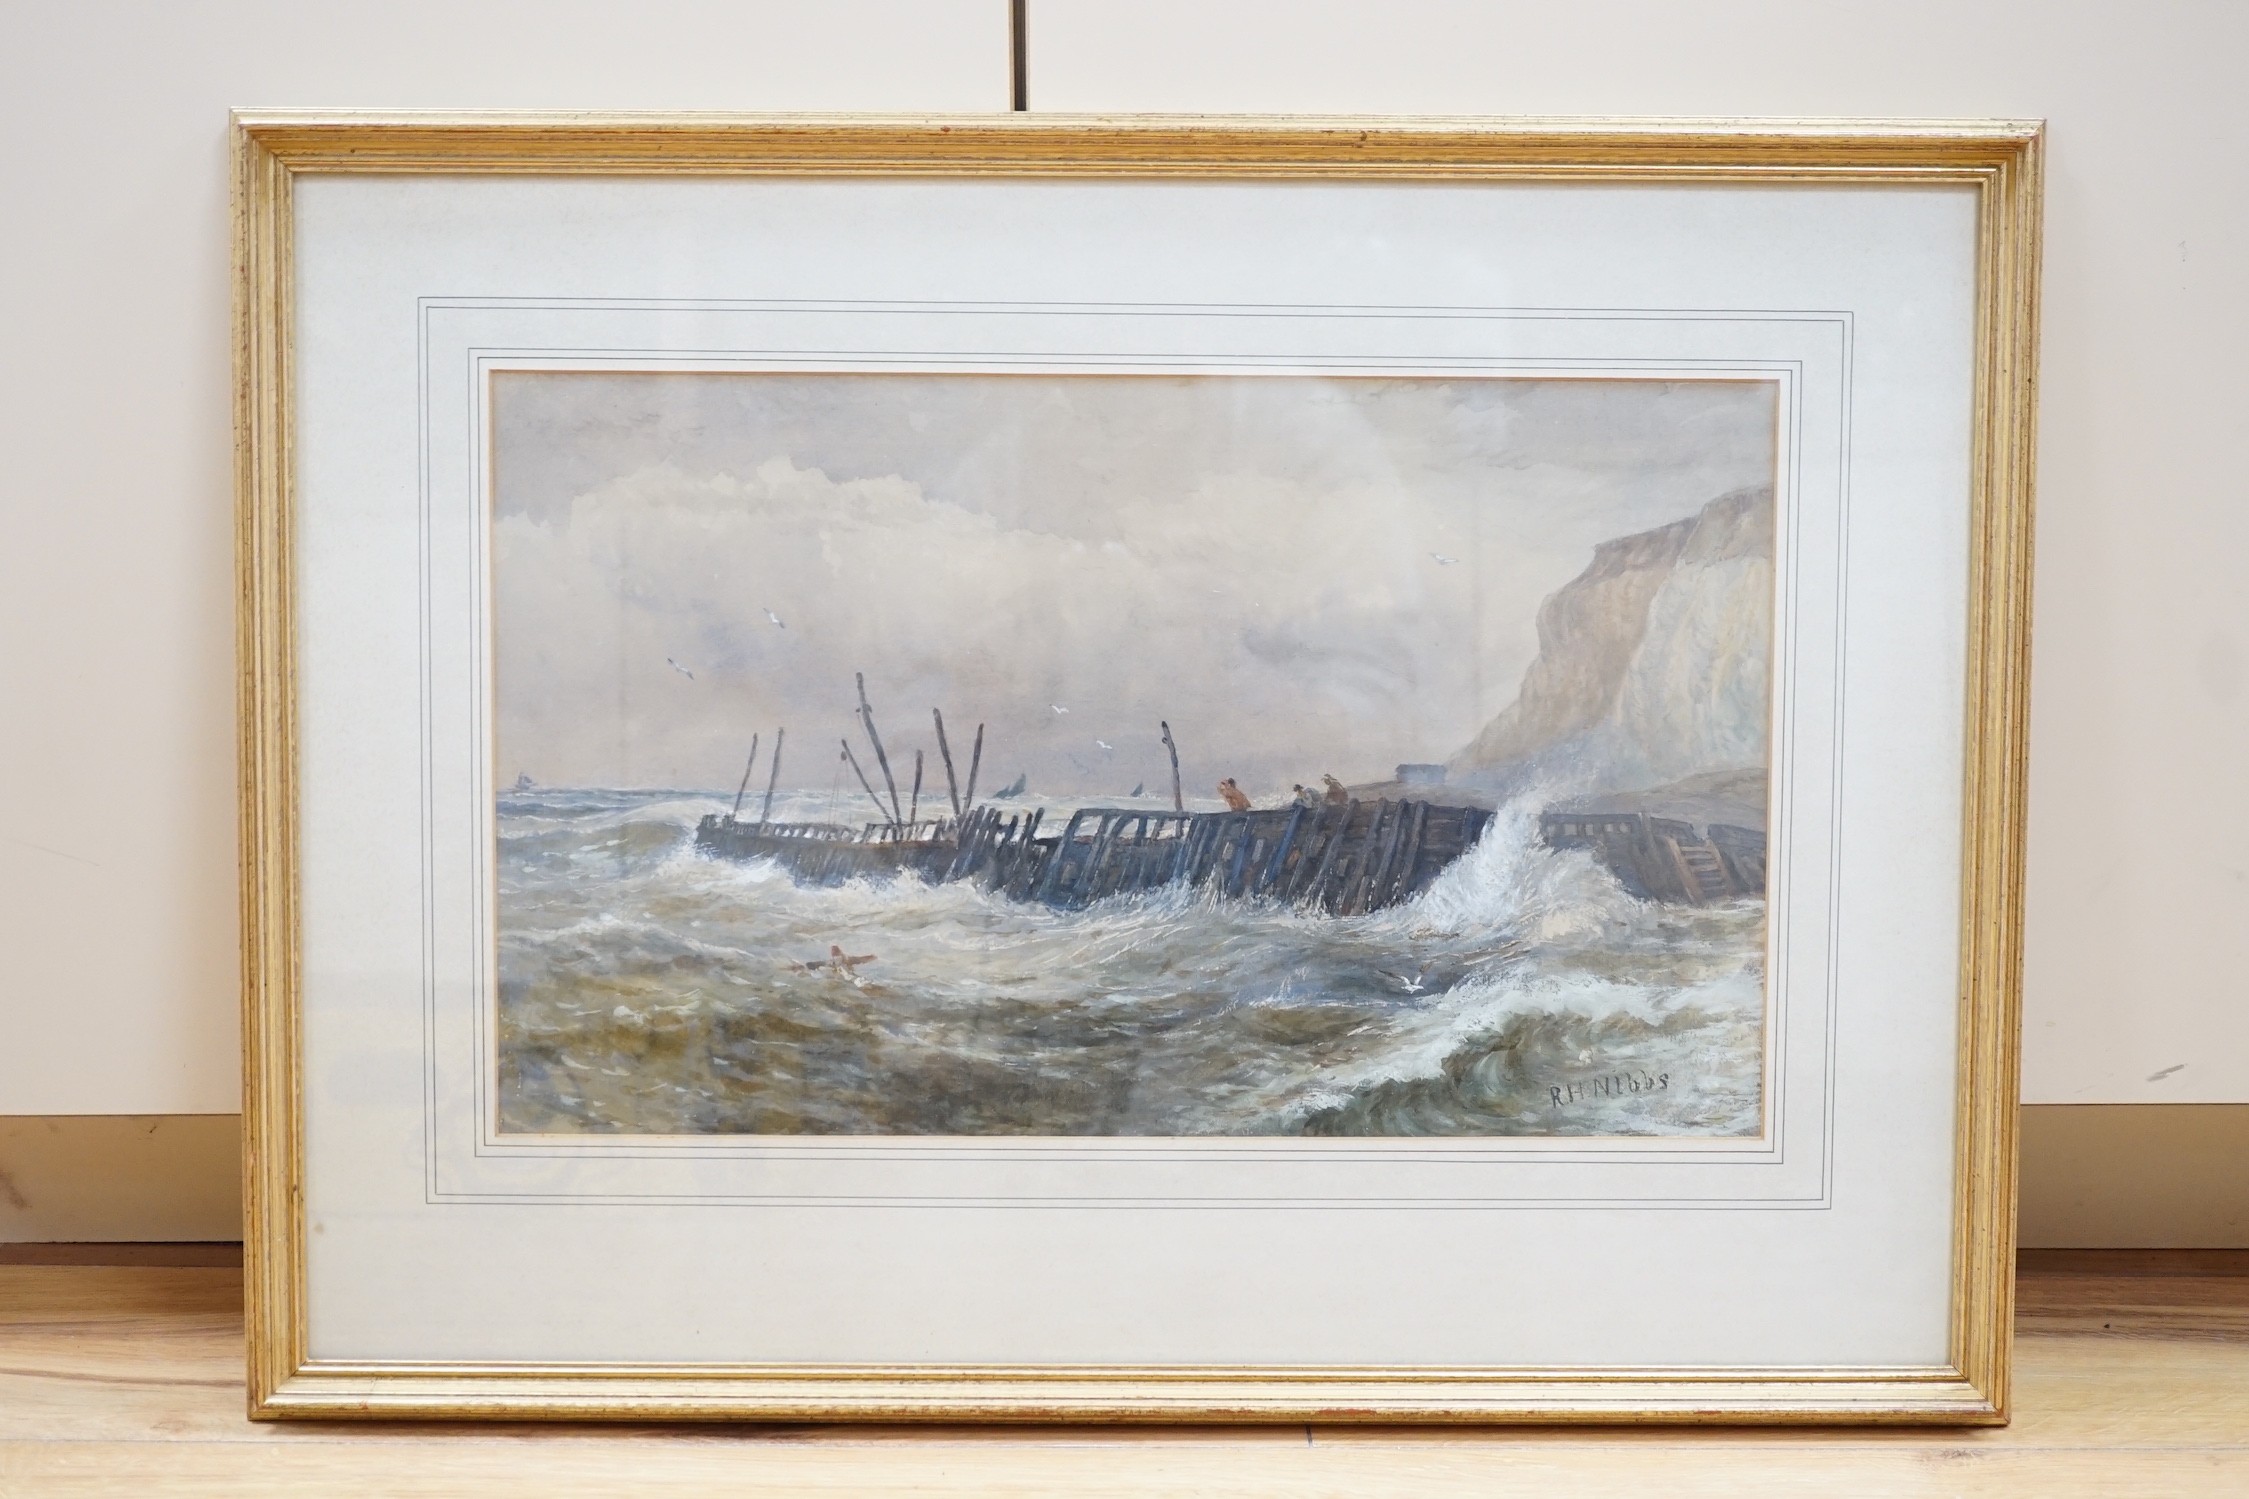 Richard Henry Nibbs (1816-1893), watercolour, 'The Old Breakwater, Newhaven', signed, 27 x 46cm